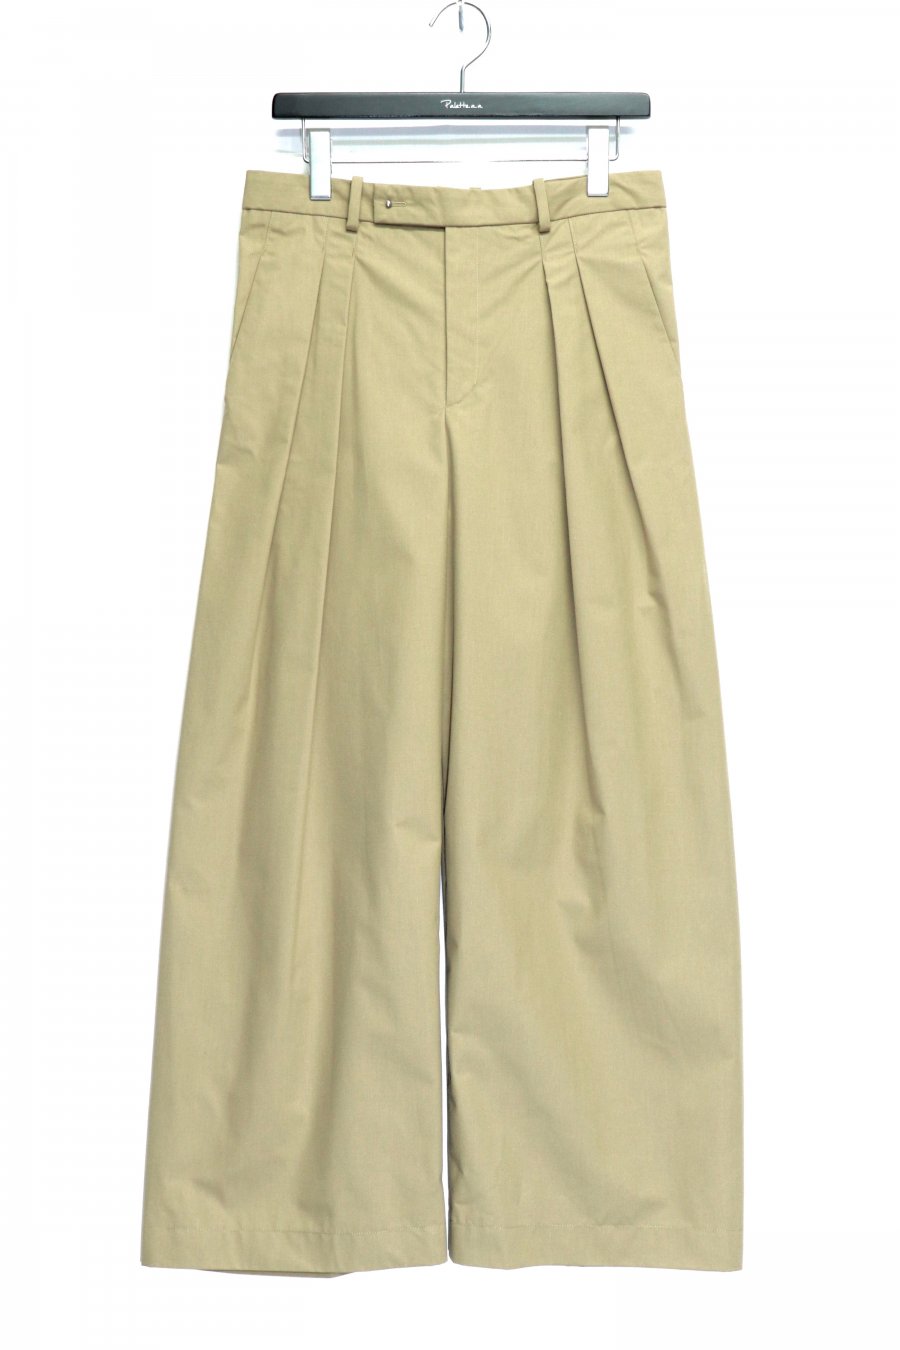 【30%OFF】KONYA  Tucked Wide Pants(BEIGE)<img class='new_mark_img2' src='https://img.shop-pro.jp/img/new/icons20.gif' style='border:none;display:inline;margin:0px;padding:0px;width:auto;' />